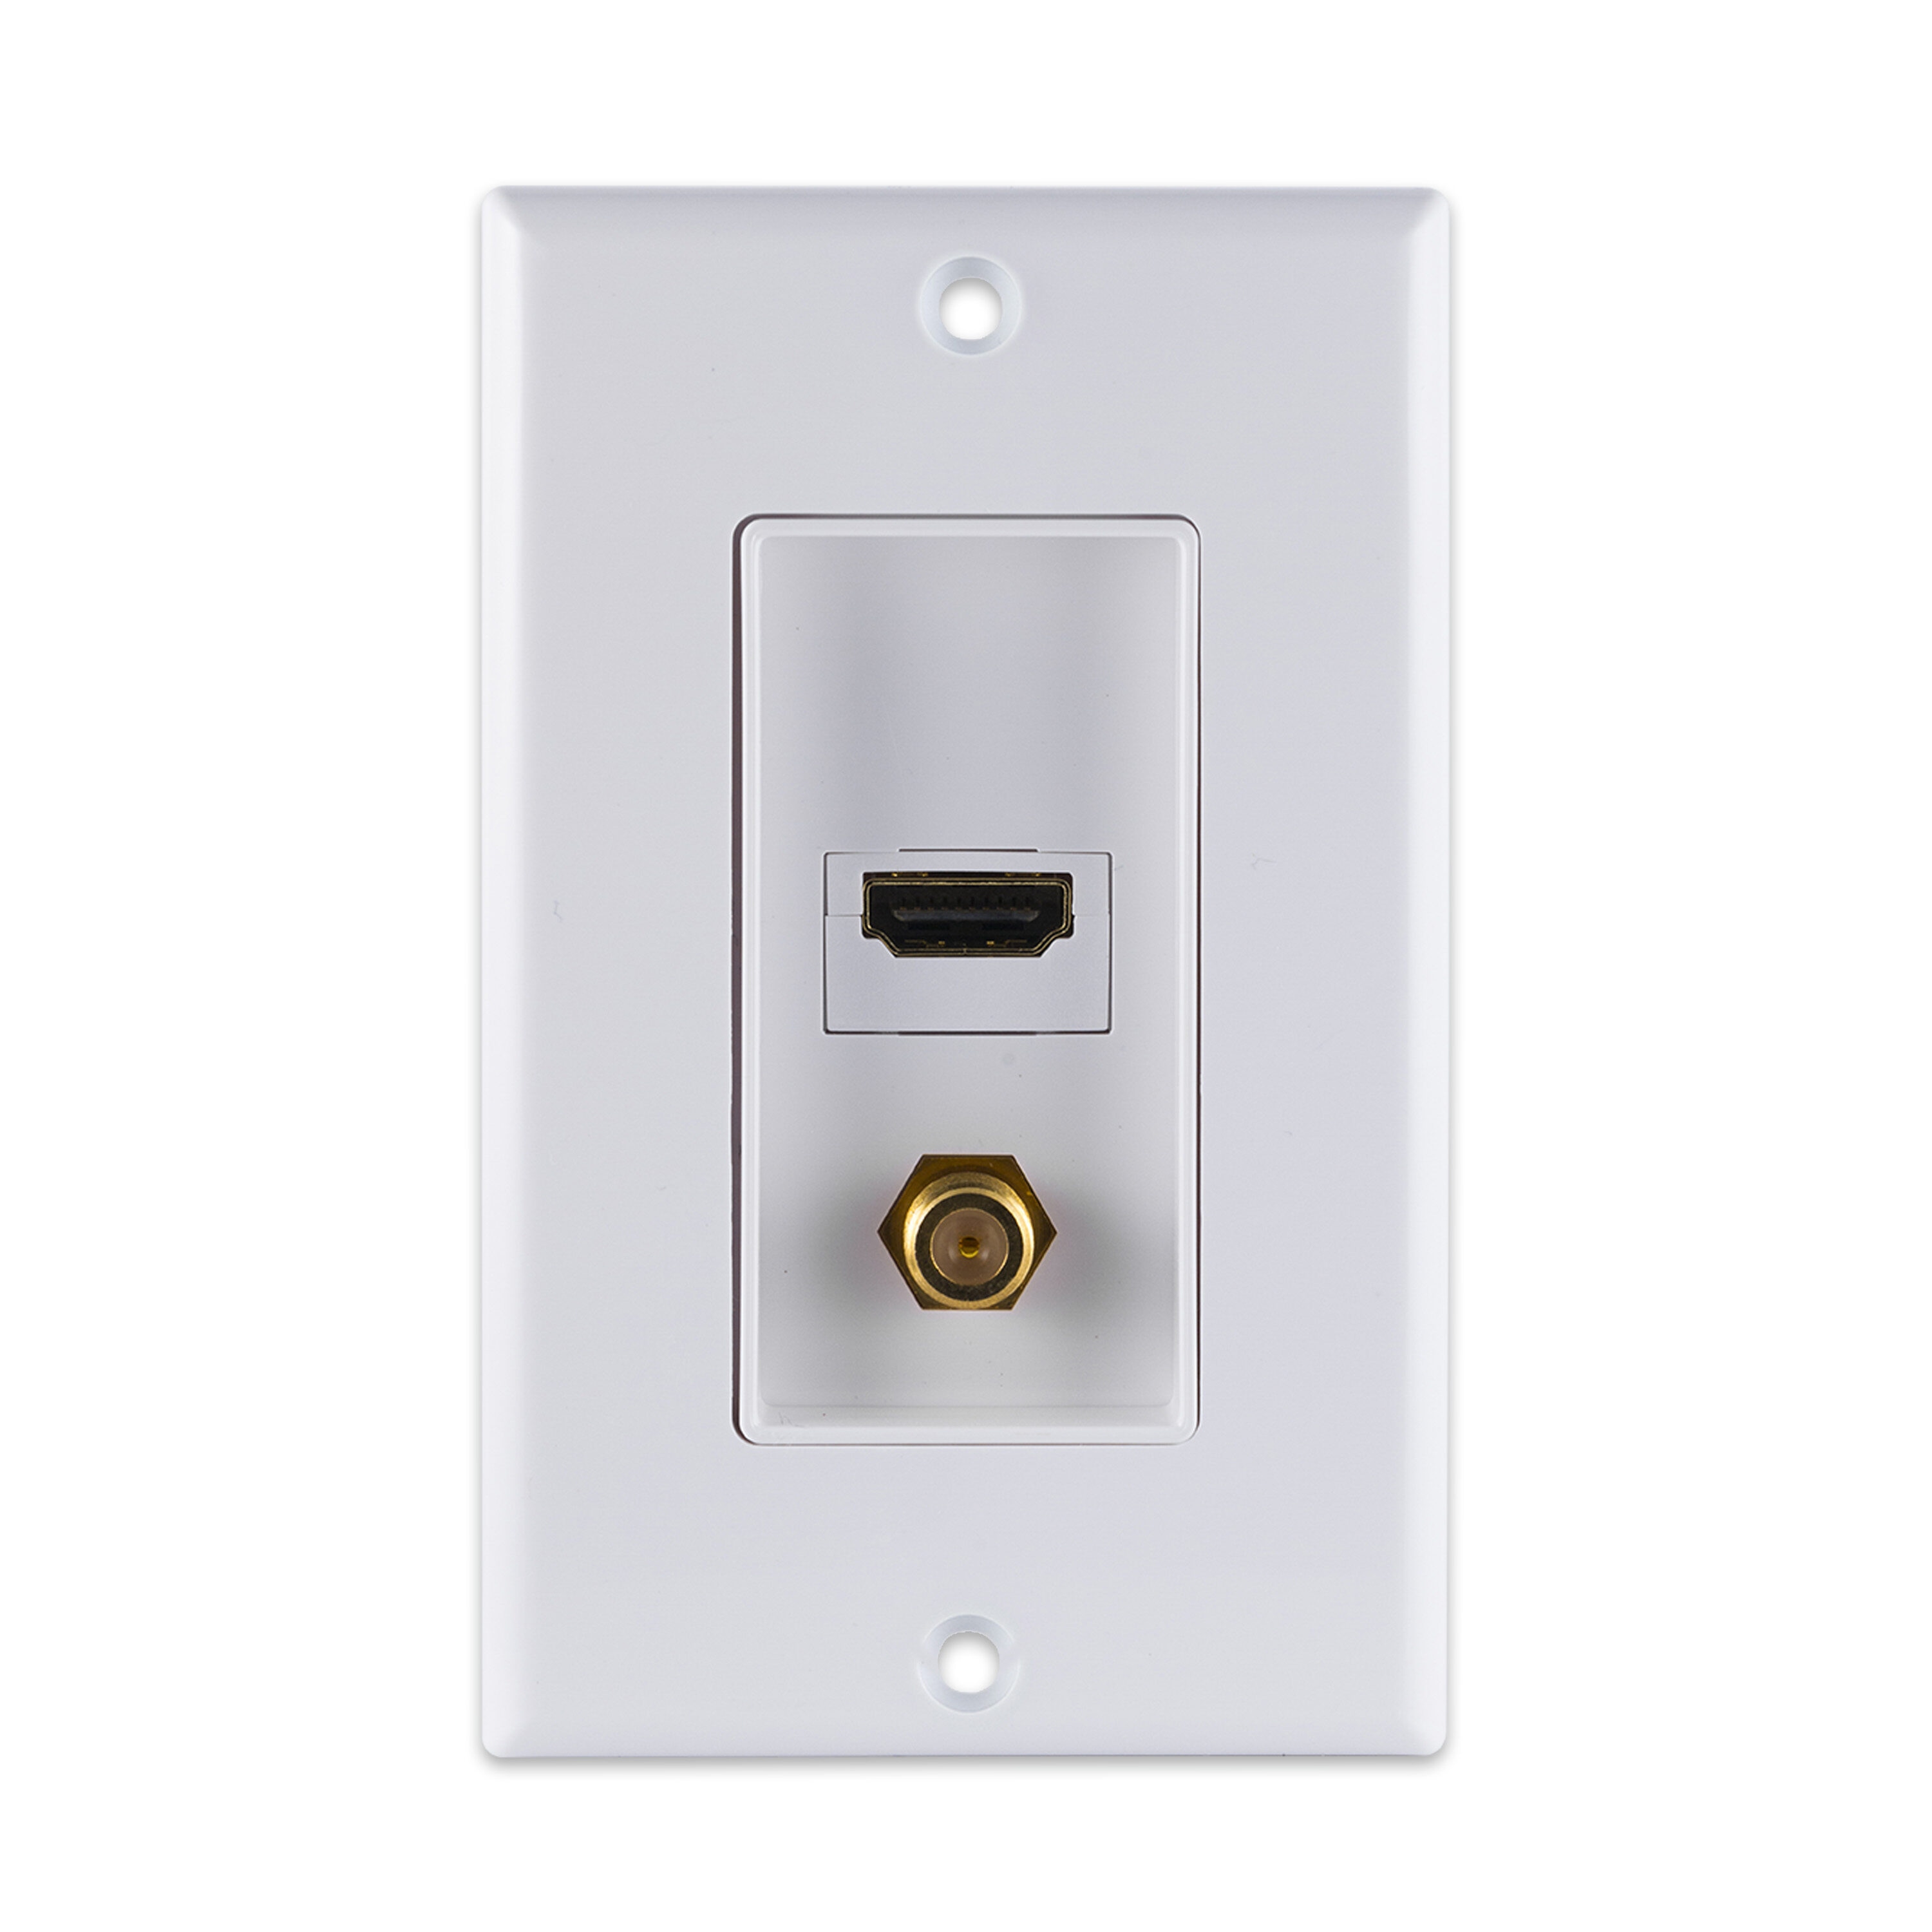 HDMI Wall Plate Dual 2 Port Socket Plug Jack Outlet Cover 4K Ethernet  Pass-Thru